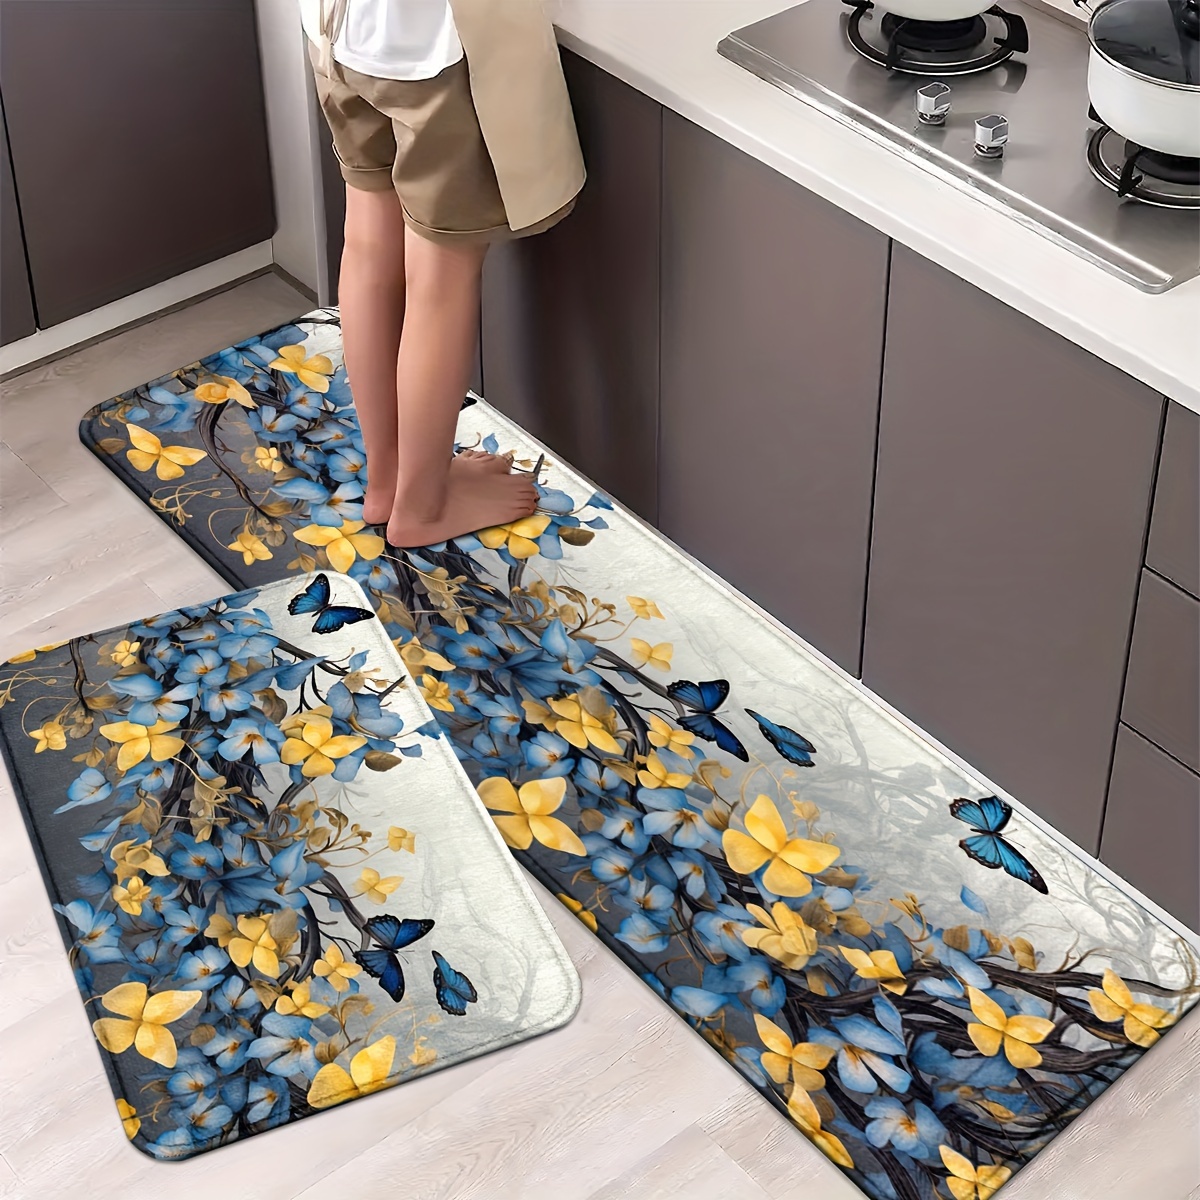 

1/2pcs, Butterfly Kitchen Mats, Non-slip And Durable Bathroom Pads, Comfortable Standing Runner Rugs, Carpets For Kitchen, Home, Office, Sink, Laundry Room, Bathroom, Spring Decor